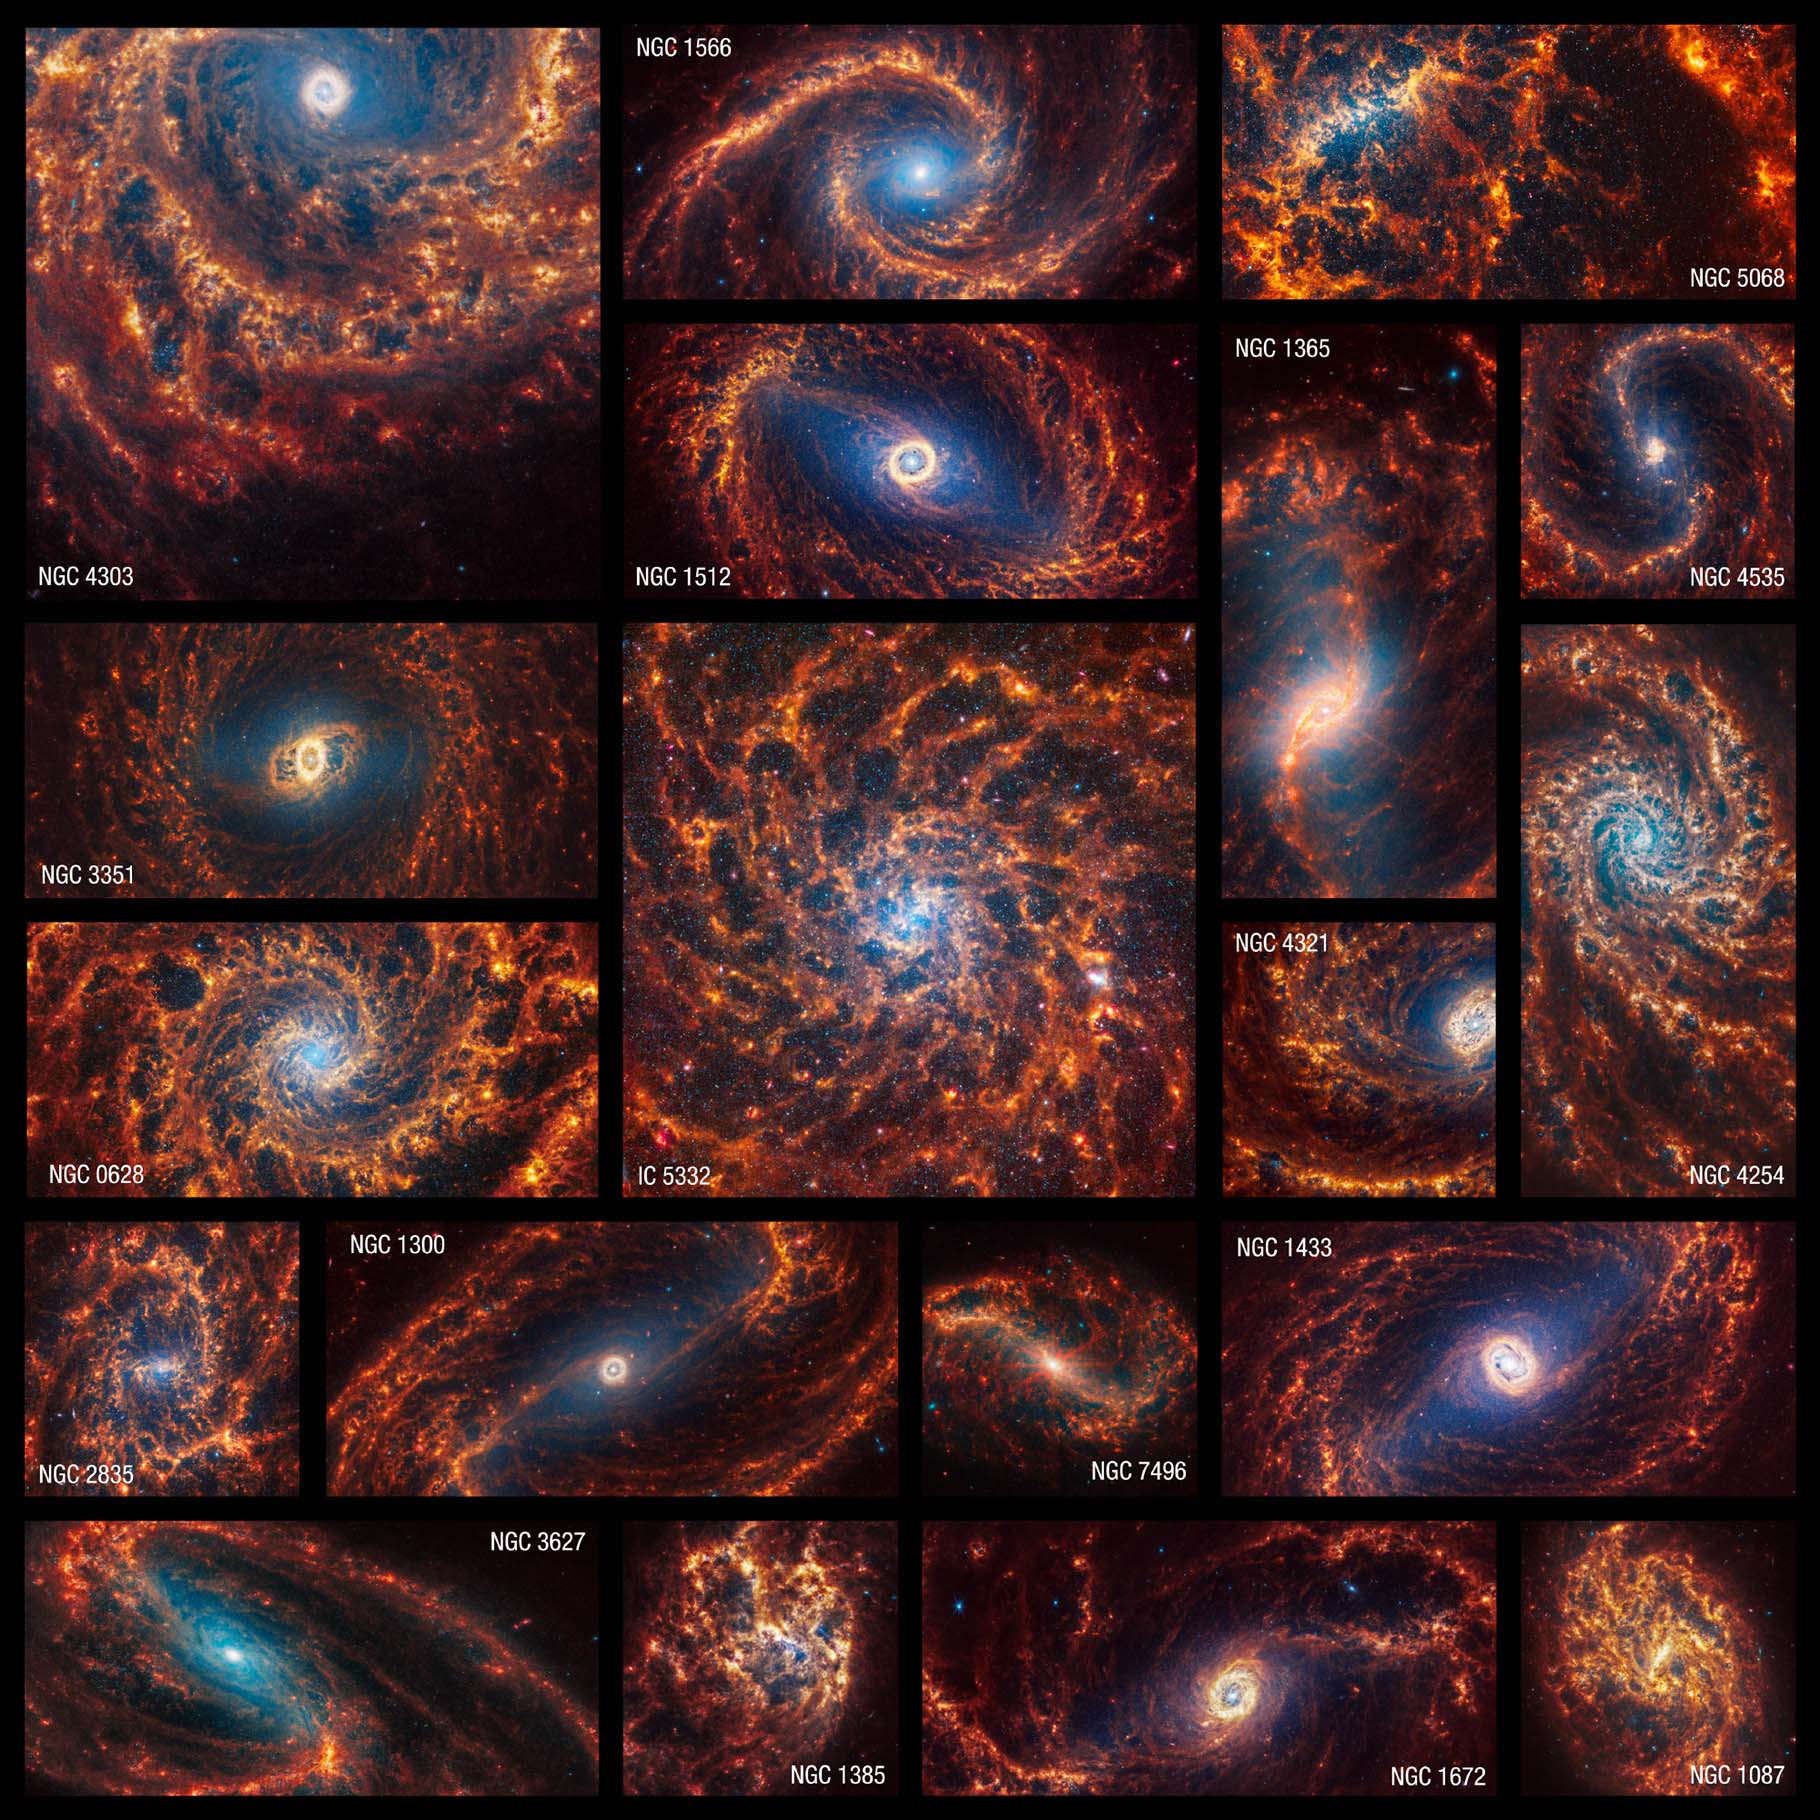 Nineteen Webb images of face-on spiral galaxies are combined in a mosaic. Some appear within squares, and others horizontal or vertical rectangles. Many galaxies have blue hazes toward the centers, and all have orange spiral arms. Many have clear bar shaped-structures at their centers, but a few have spirals that begin at their cores. Some of the galaxies' arms form clear spiral shapes, while others are more irregular. Some of the galaxies’ arms appear to rotate clockwise and others counterclockwise. Most galaxy cores are centered, but a few appear toward an image’s edge. Most galaxies appear to extend beyond the captured observations. The galaxies shown, listed in alphabetical order, are IC 5332, NGC 628, NGC 1087, NGC 1300, NGC 1365, NGC 1385, NGC 1433, NGC 1512, NGC 1566, NGC 1672, NGC 2835, NGC 3351, NGC 3627, NGC 4254, NGC 4303, NGC 4321, NGC 4535, NGC 5068, and NGC 7496.